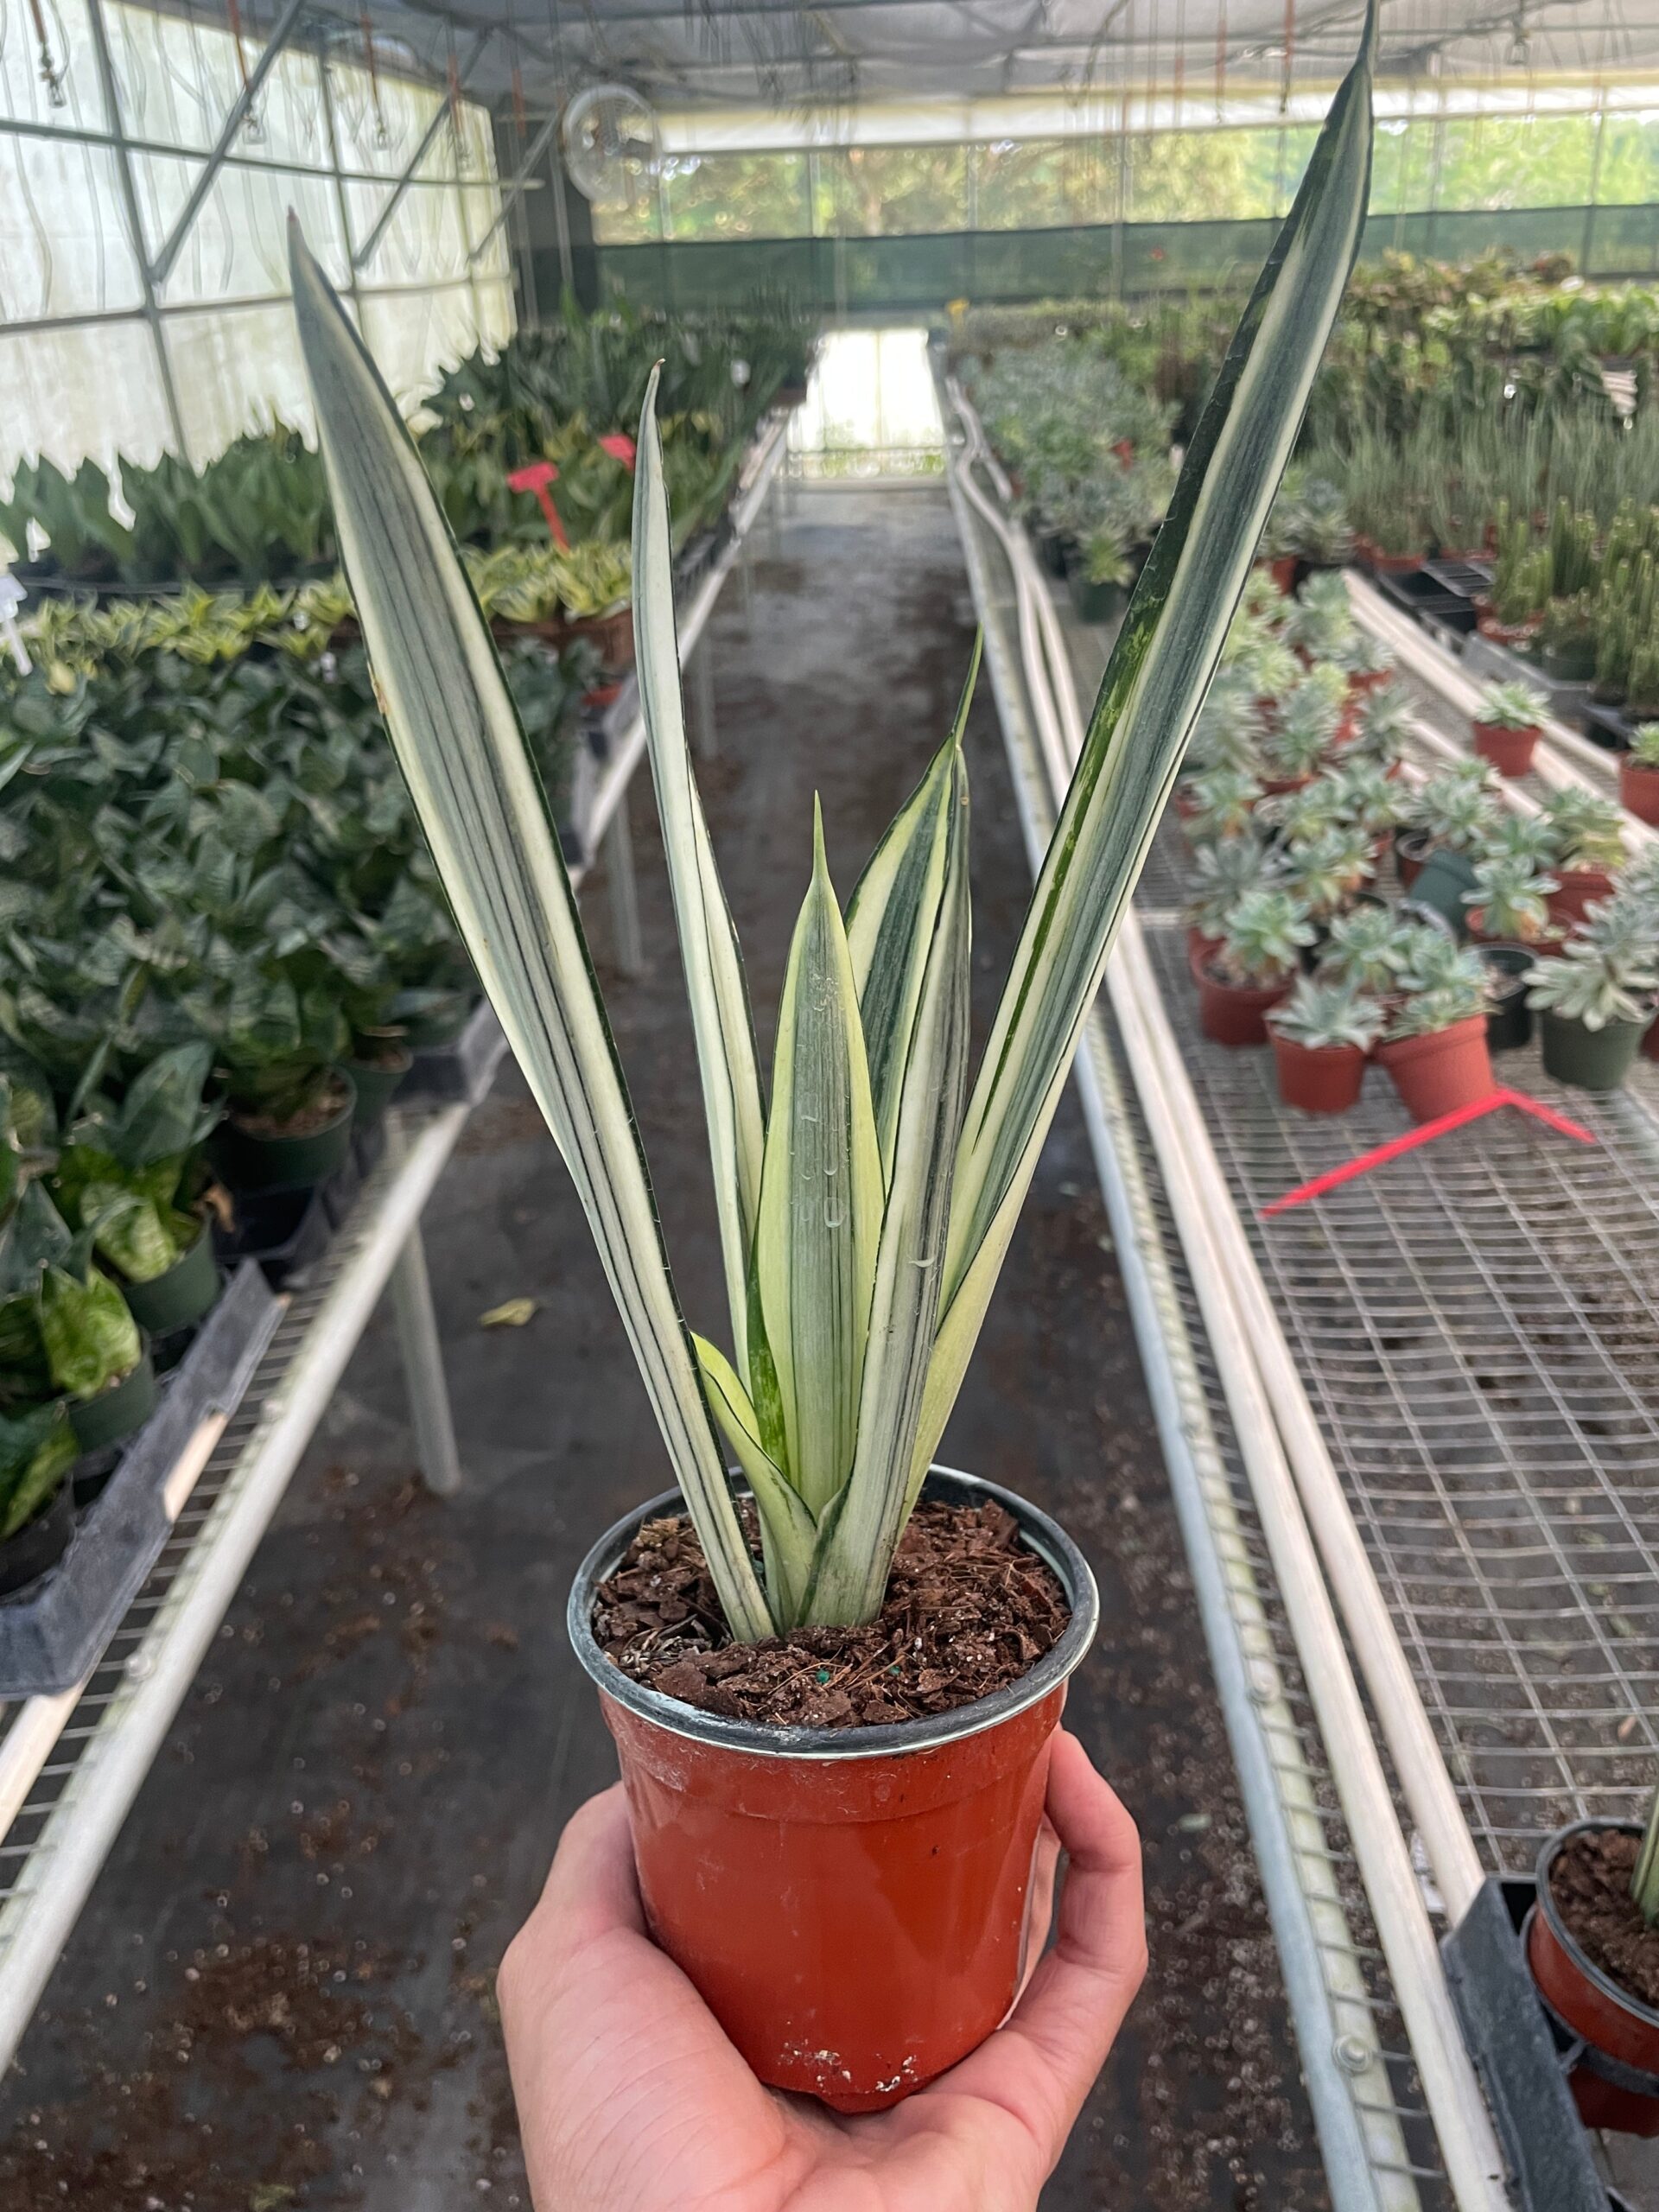 A hand holds a small potted plant with long, pointed green leaves with white edges in a greenhouse filled with various other plants.